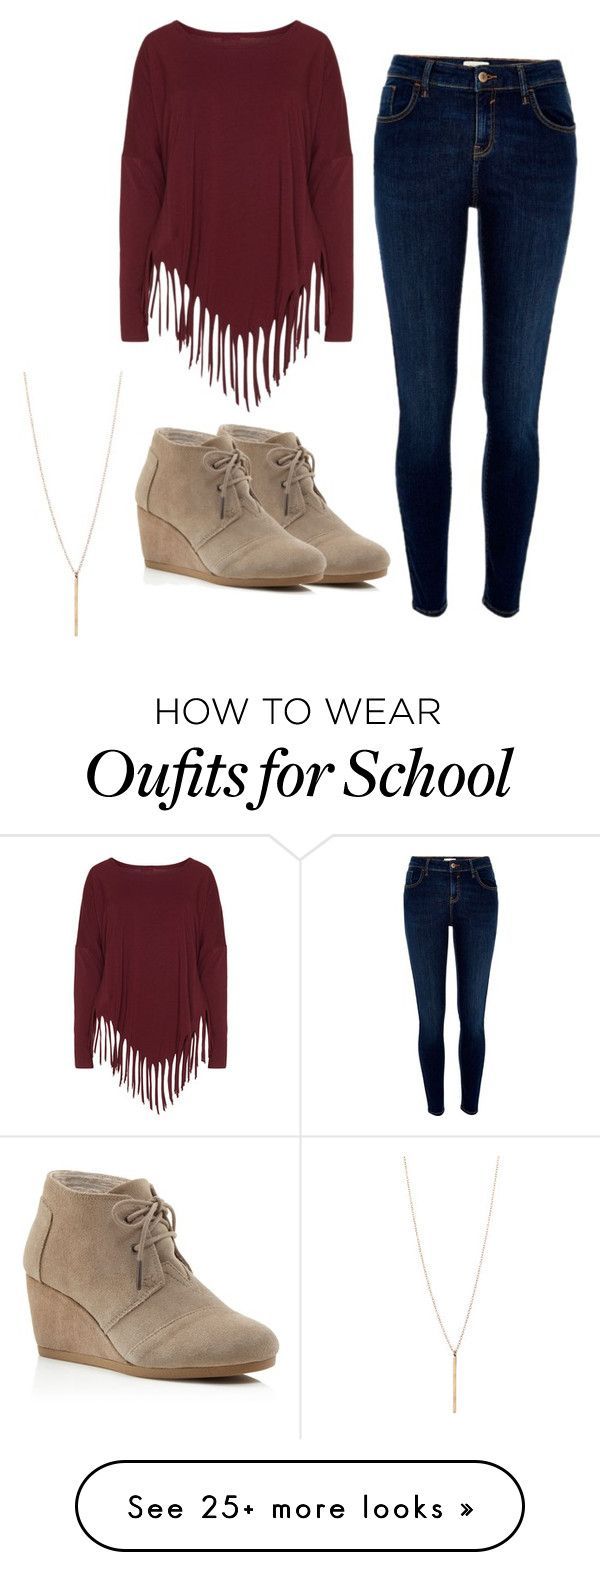 “school ready” by taylor-martin-3 on Polyvore featuring River Island, TOMS and Boris